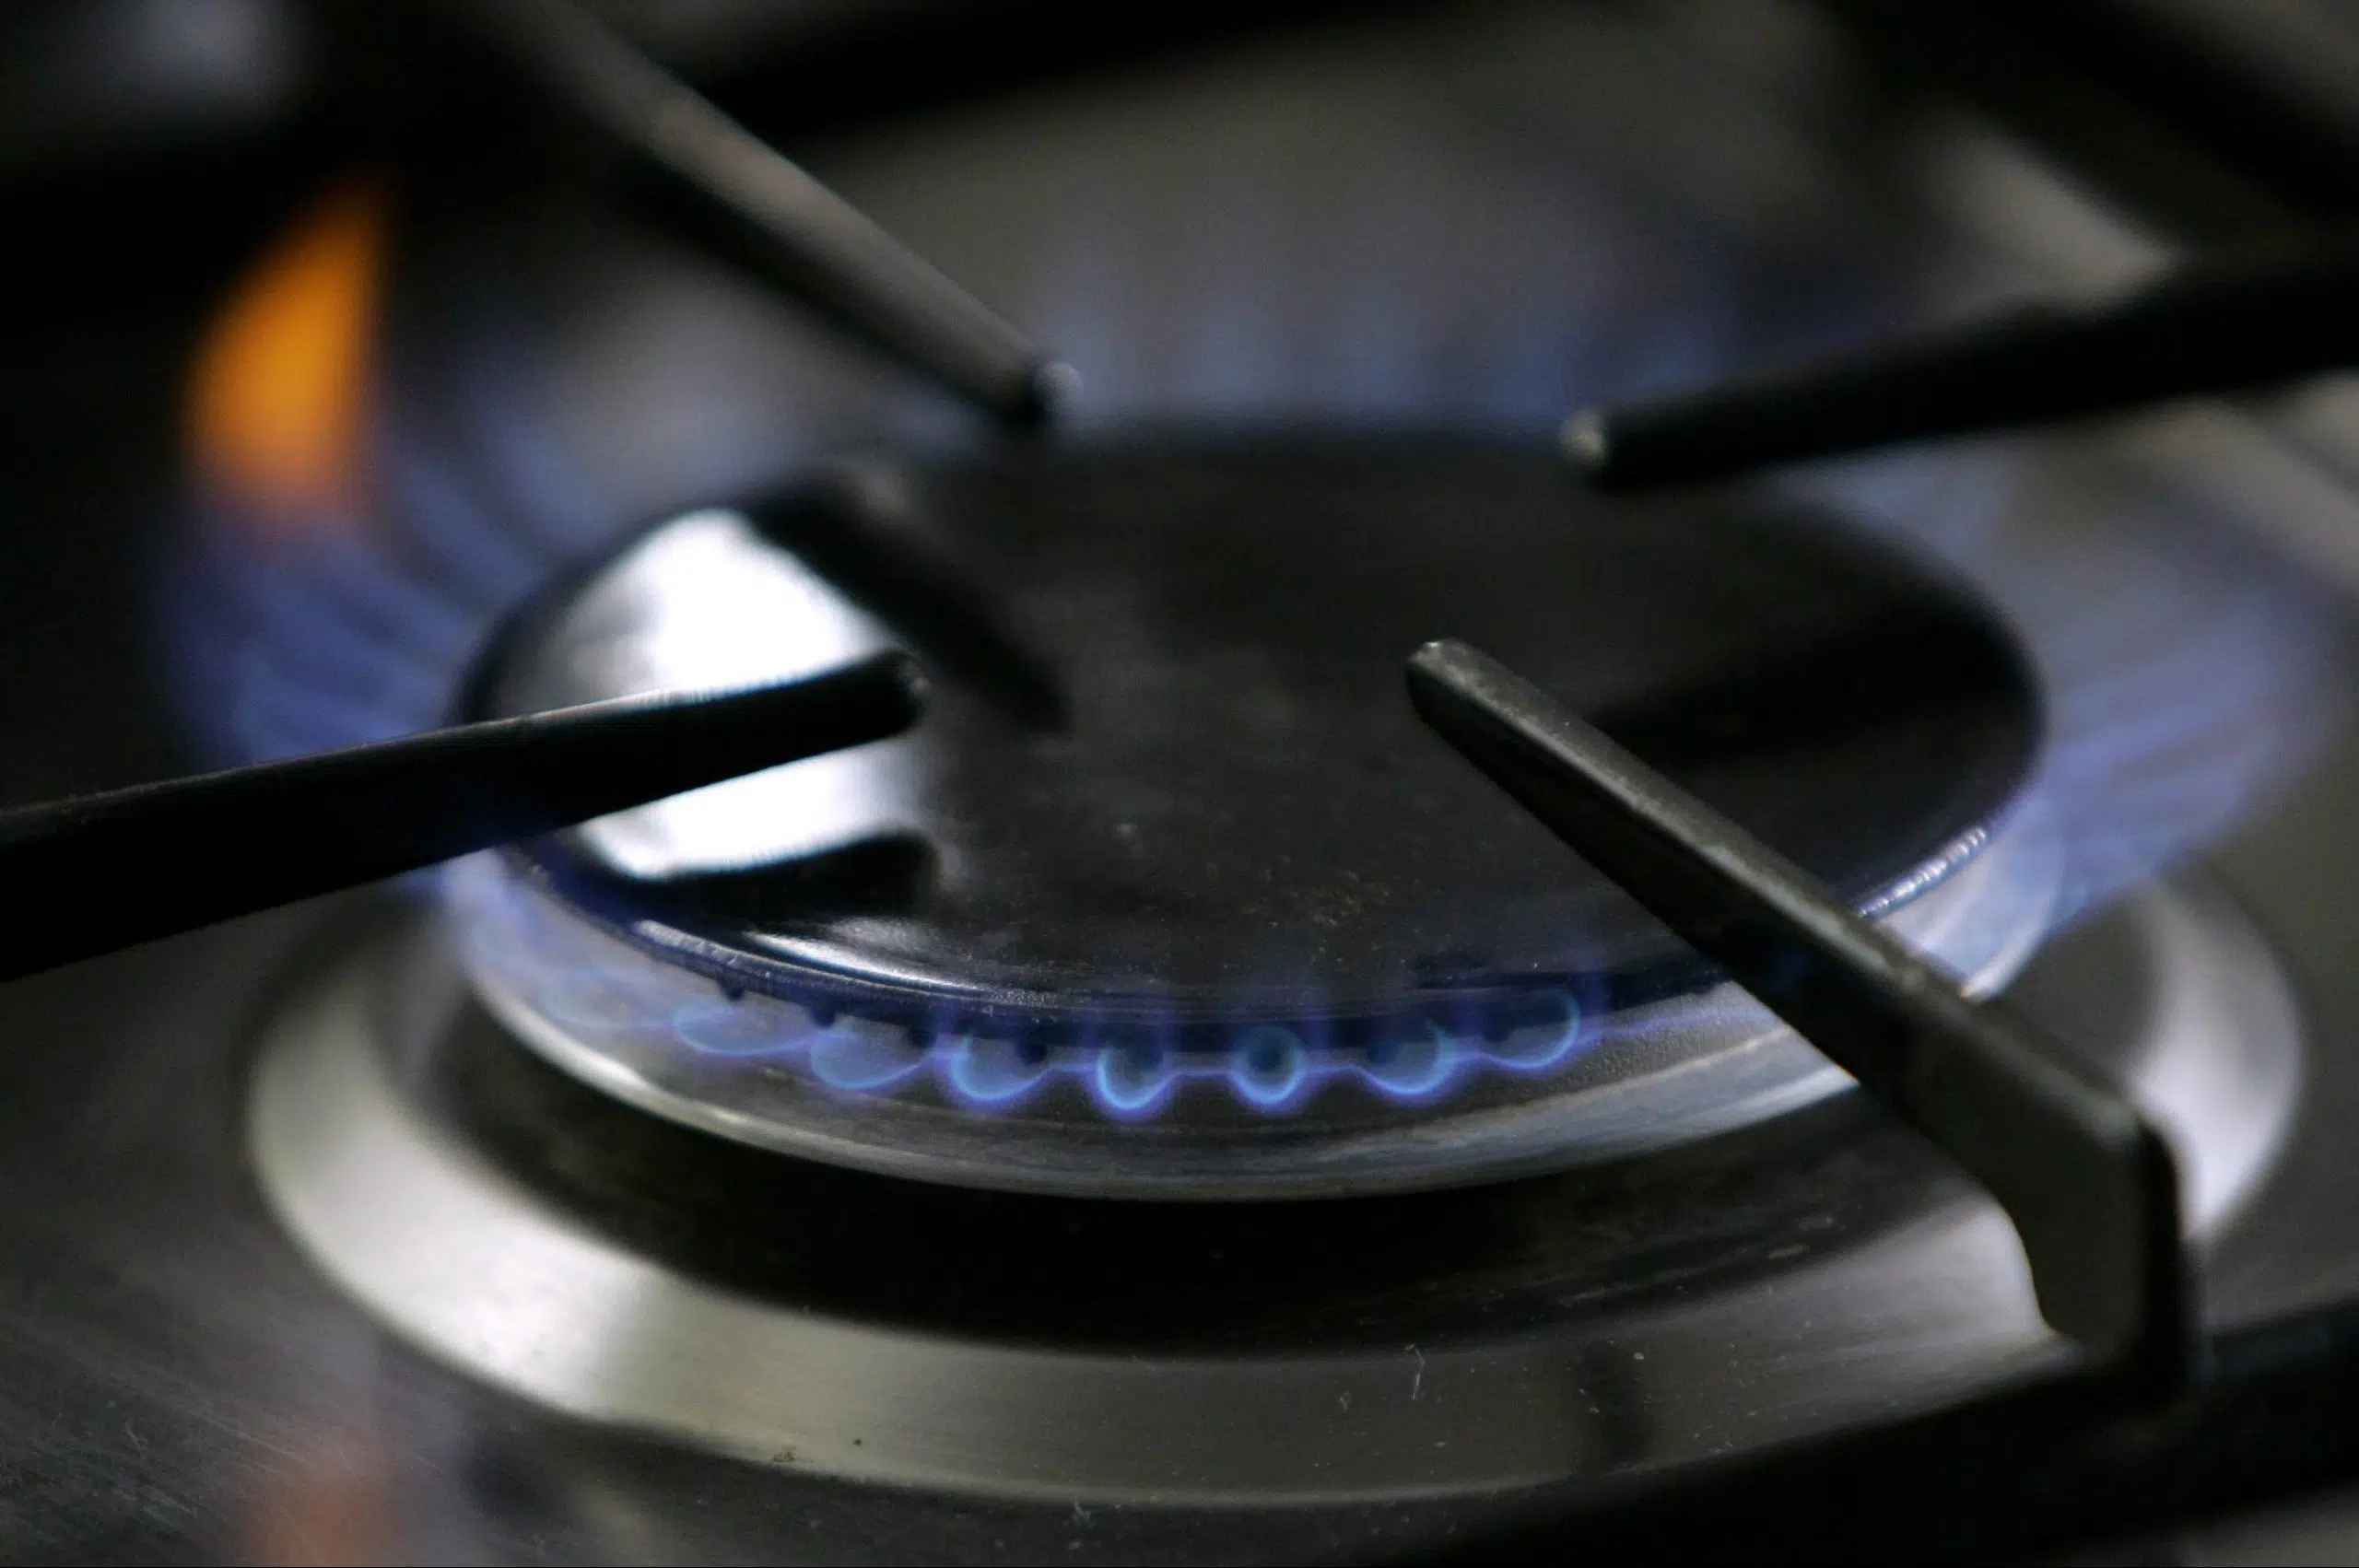 Morgan: Gas stove ban would be problematic for Saskatchewan people